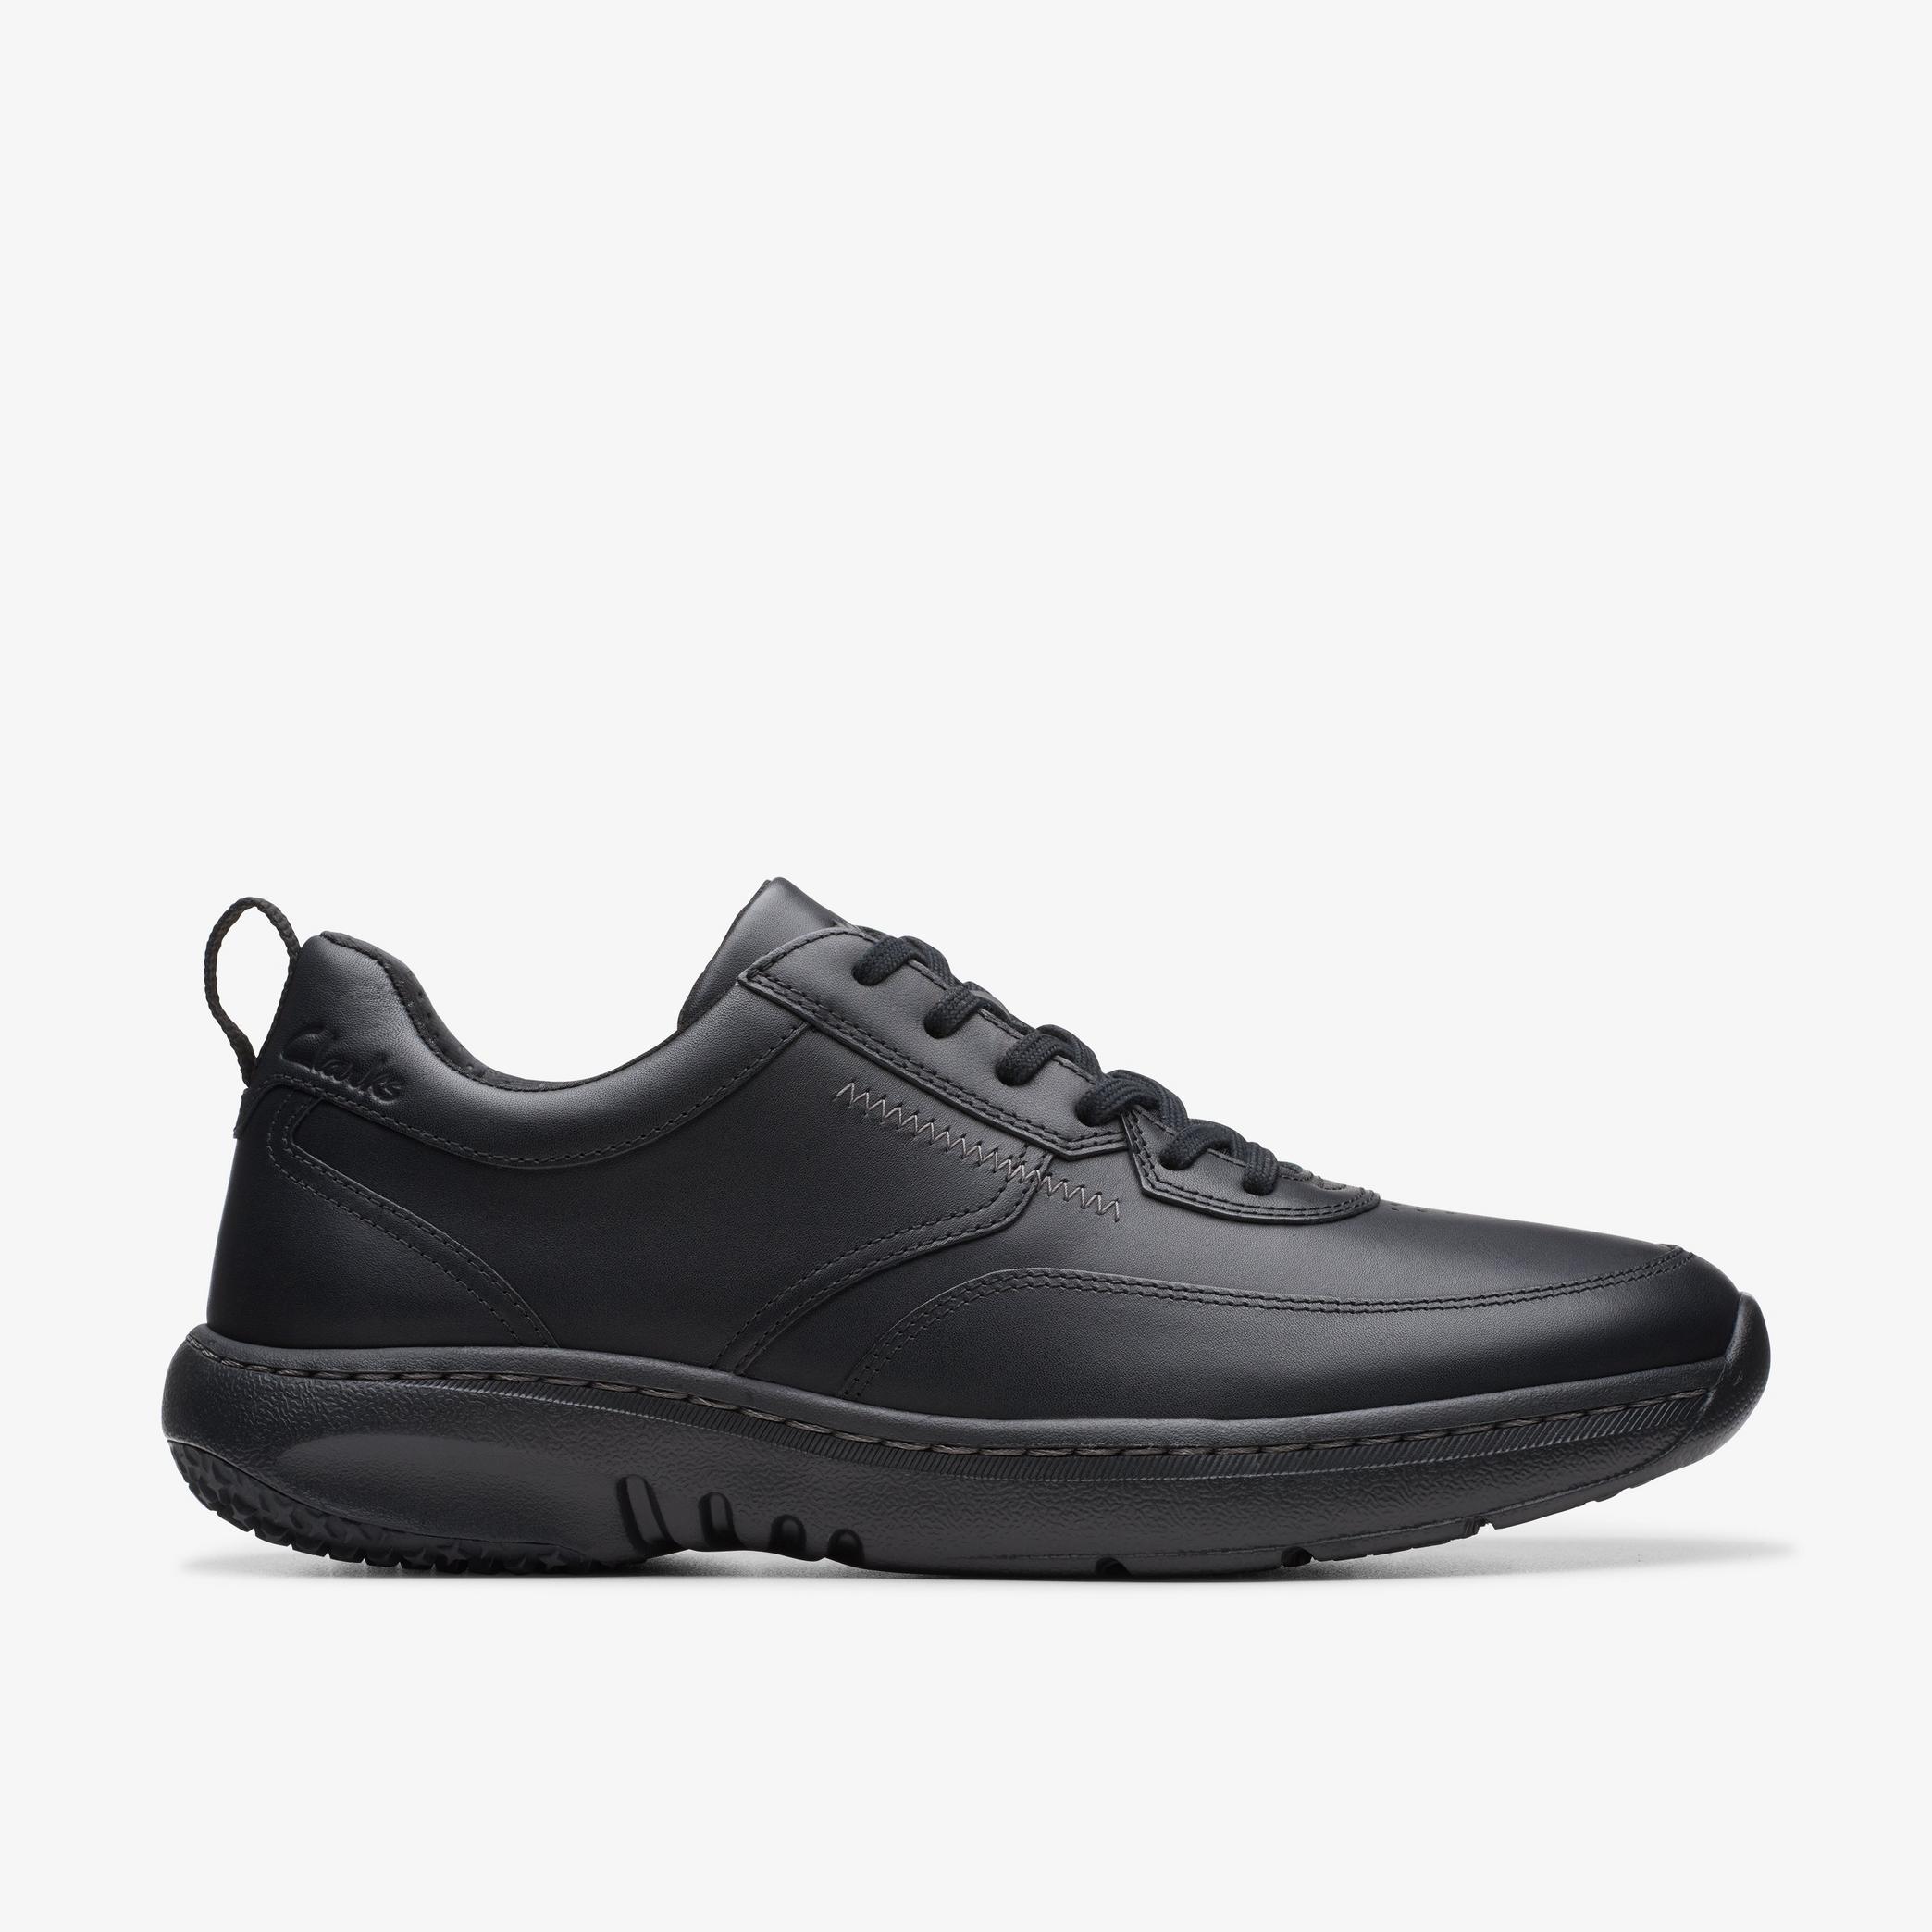 MENS Clarks Pro Lace Black Leather Sneakers | Clarks US